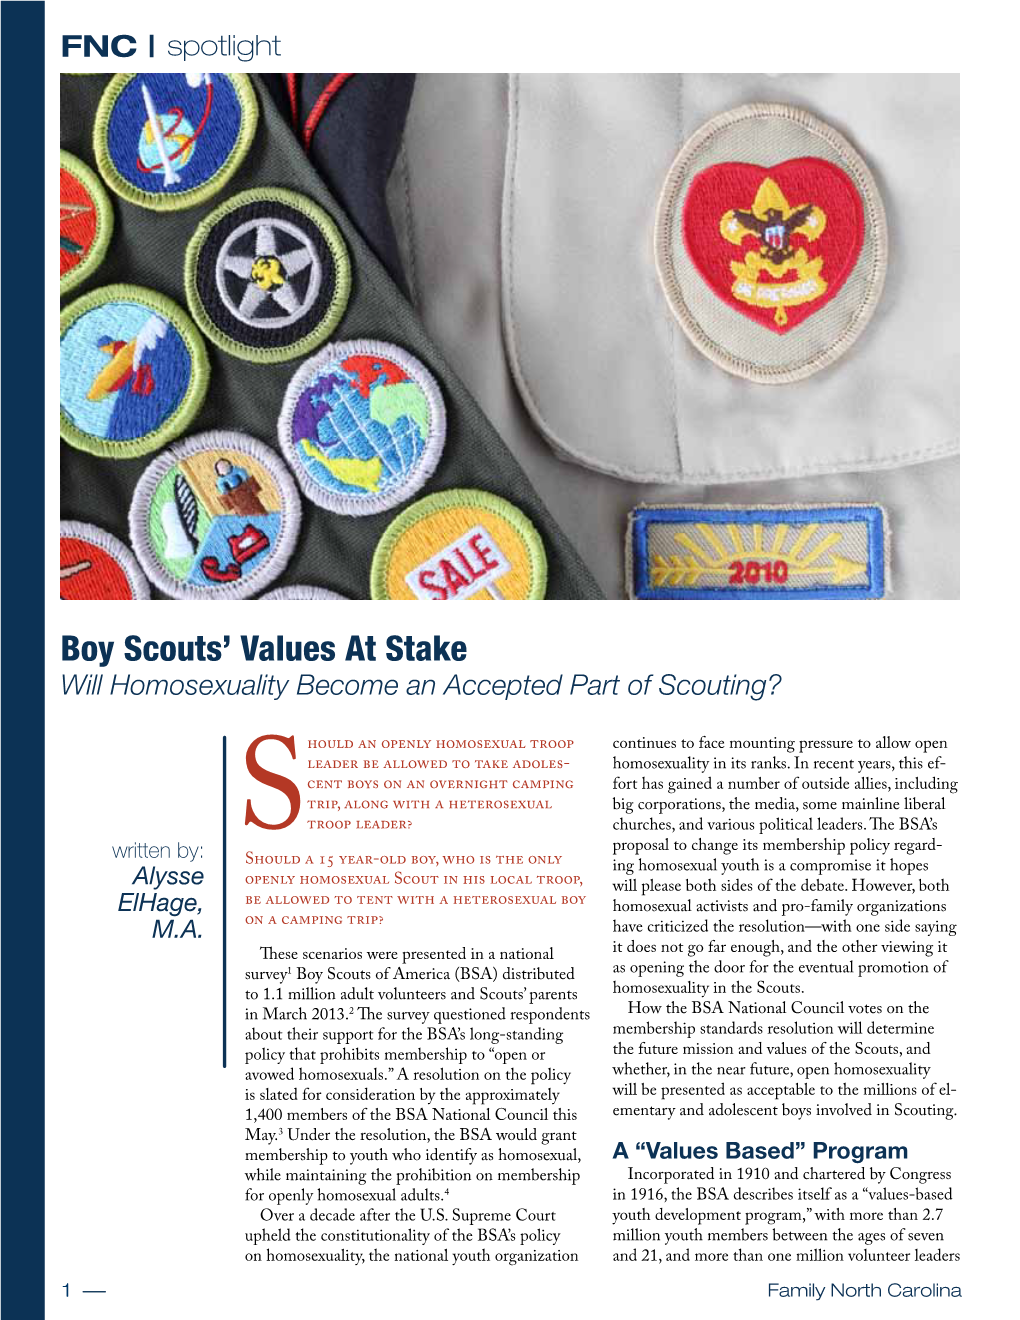 Boy Scouts' Values at Stake